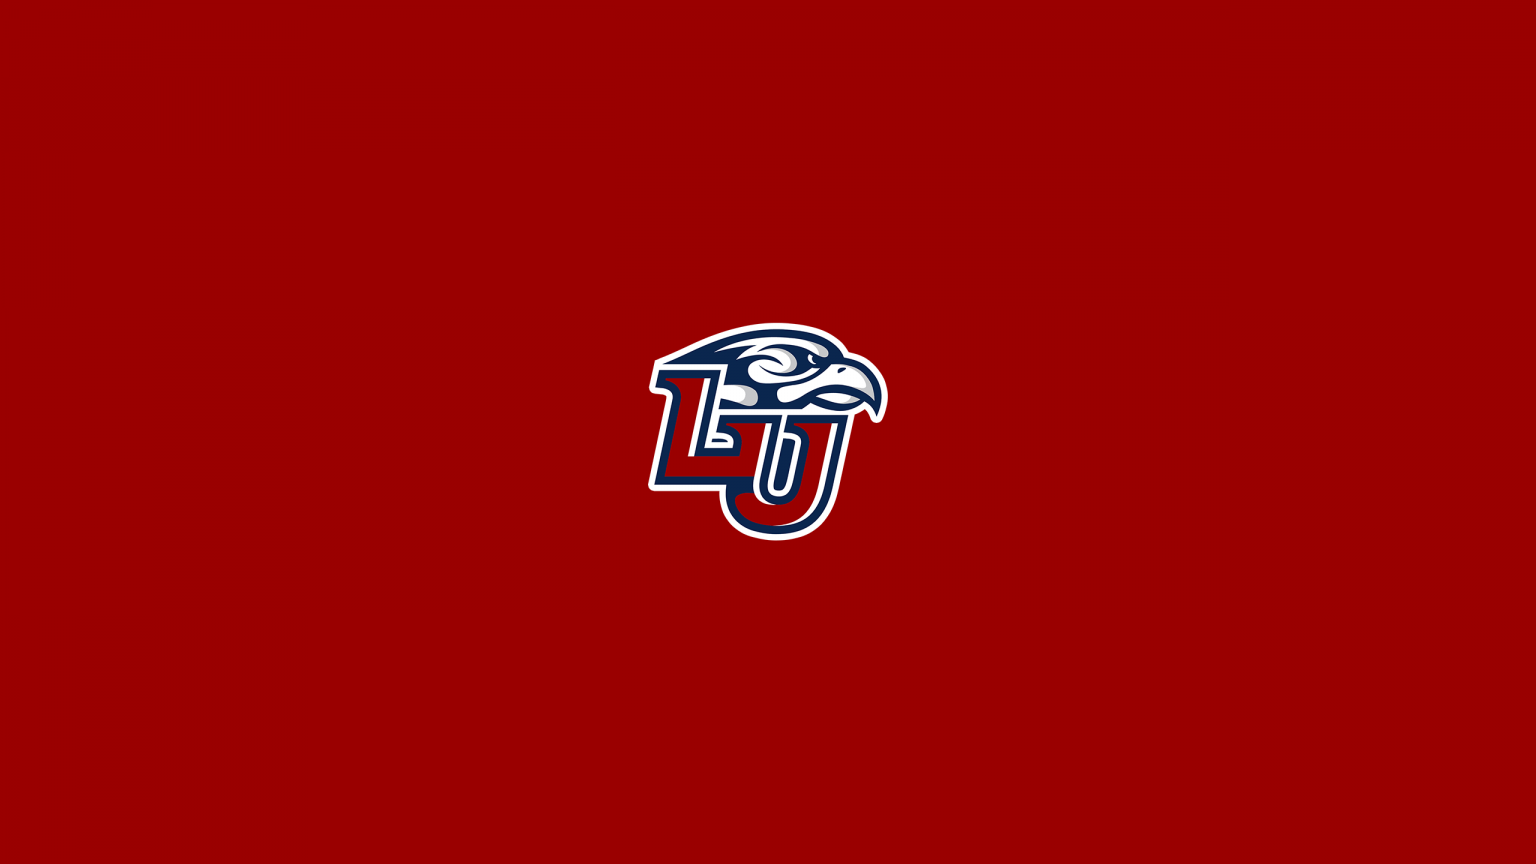 Liberty Flames Football - NCAAF - Square Bettor